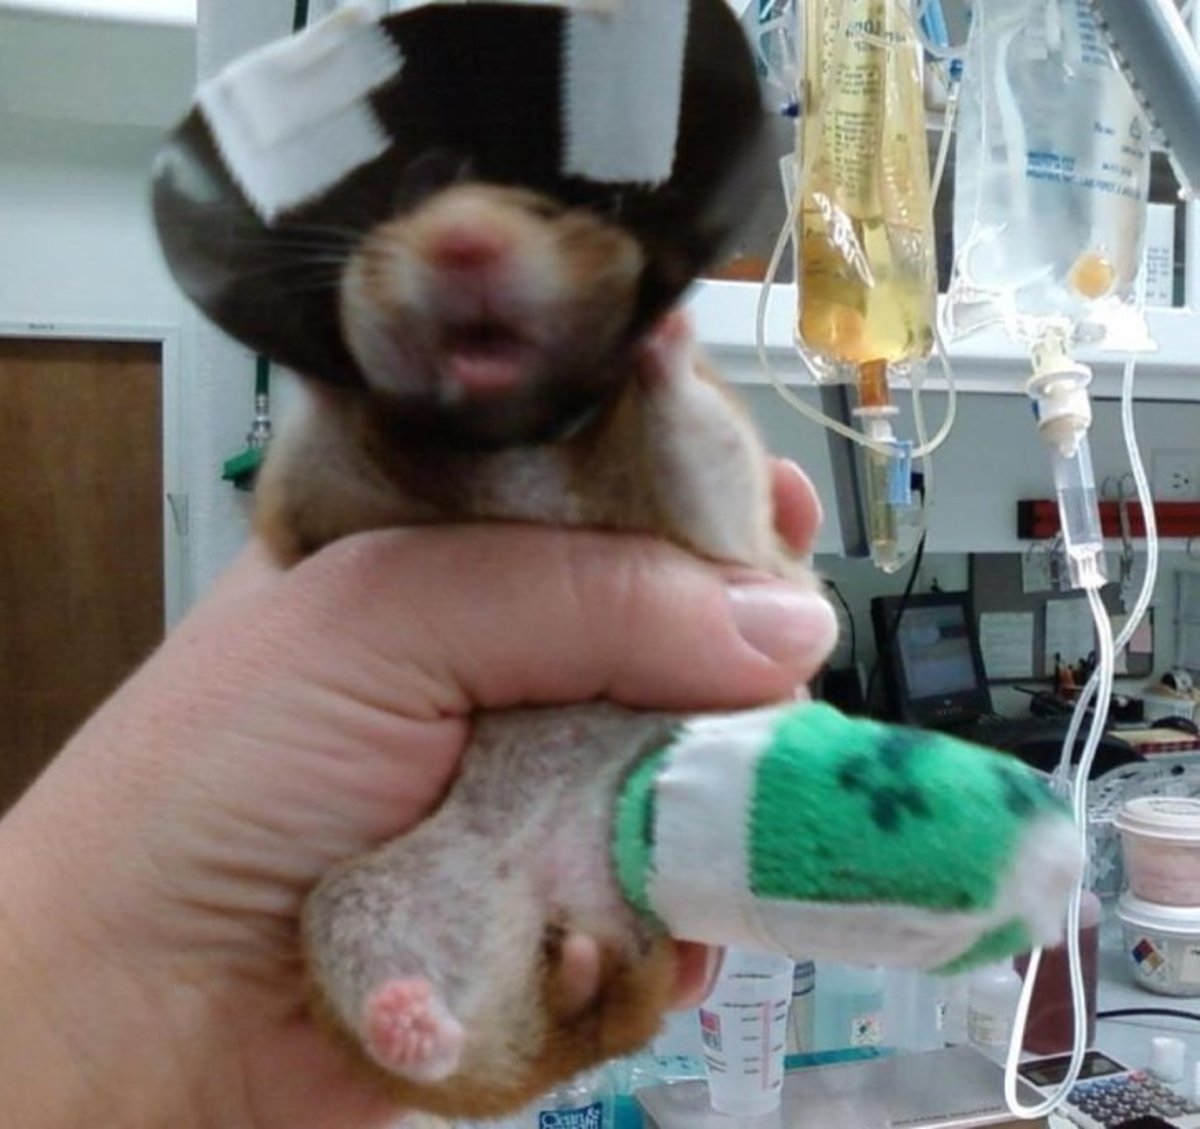 This particular hamster ran into a cat and his tibia was broken. The hamster's owner was married to a Vet Tech at a feline veterinary hospital where they bandaged the hamster. 